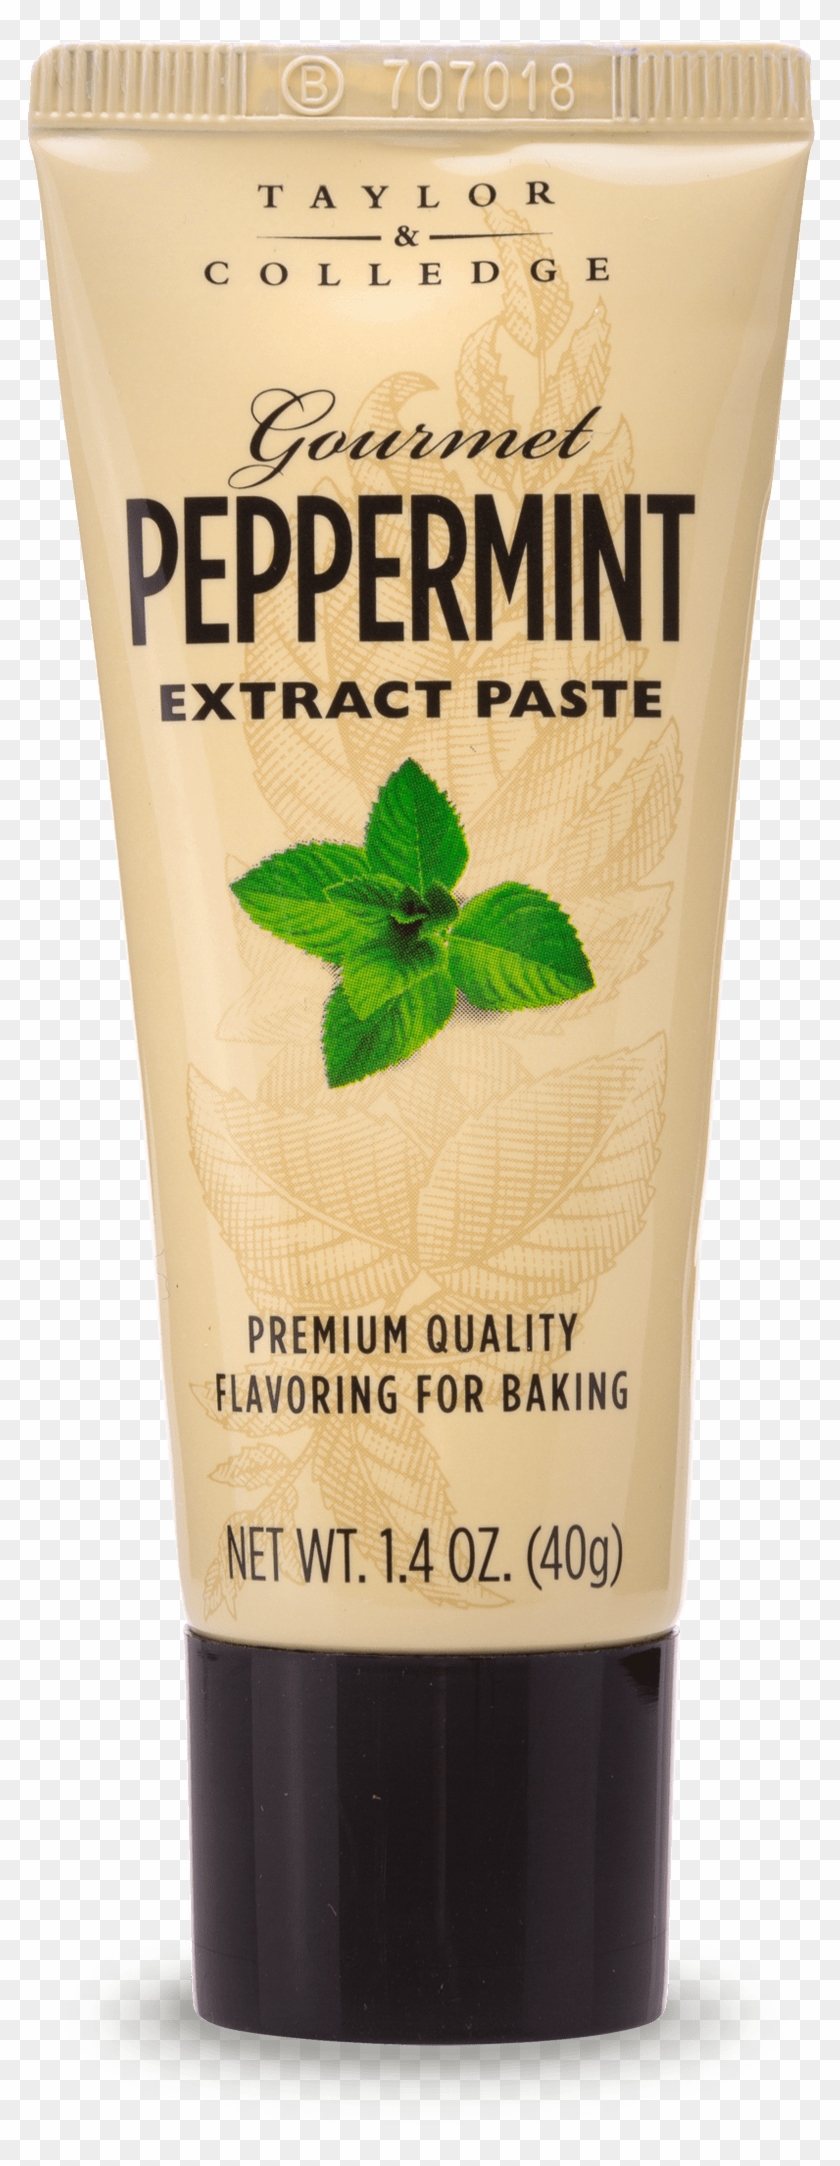 Gourmet Peppermint Extract Paste - Cosmetics Clipart #4545078